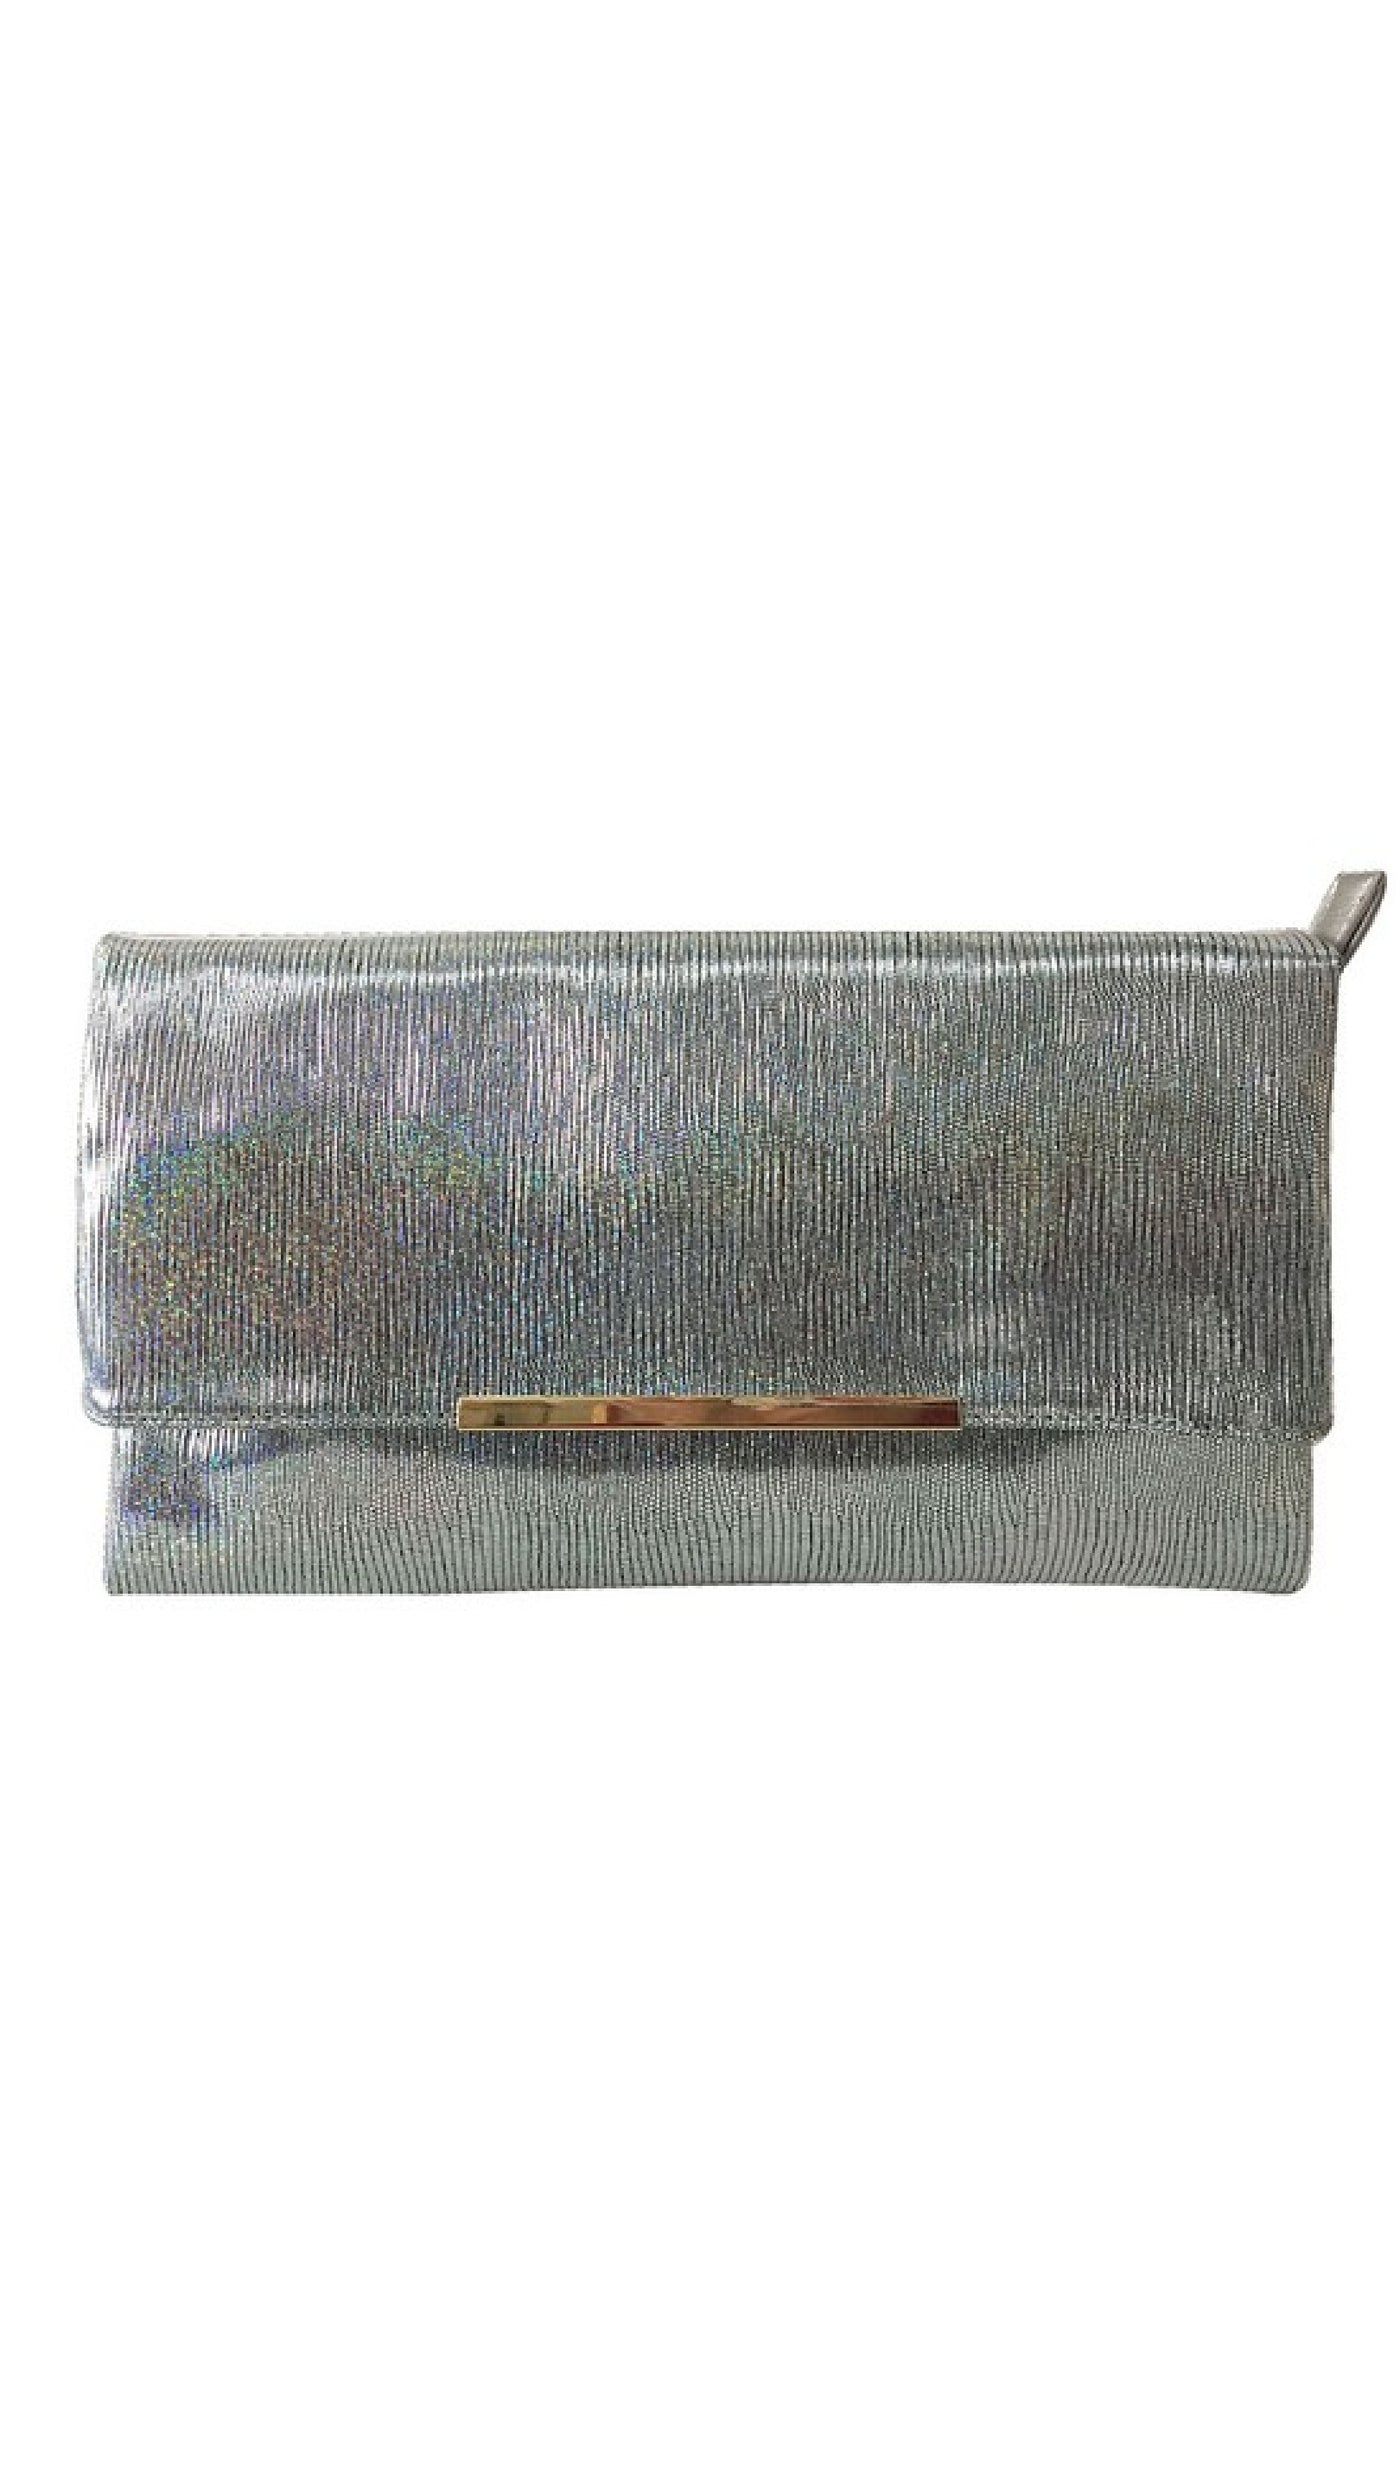 Taking It With Me Bag - Silver - Piper and Hollow Boutique